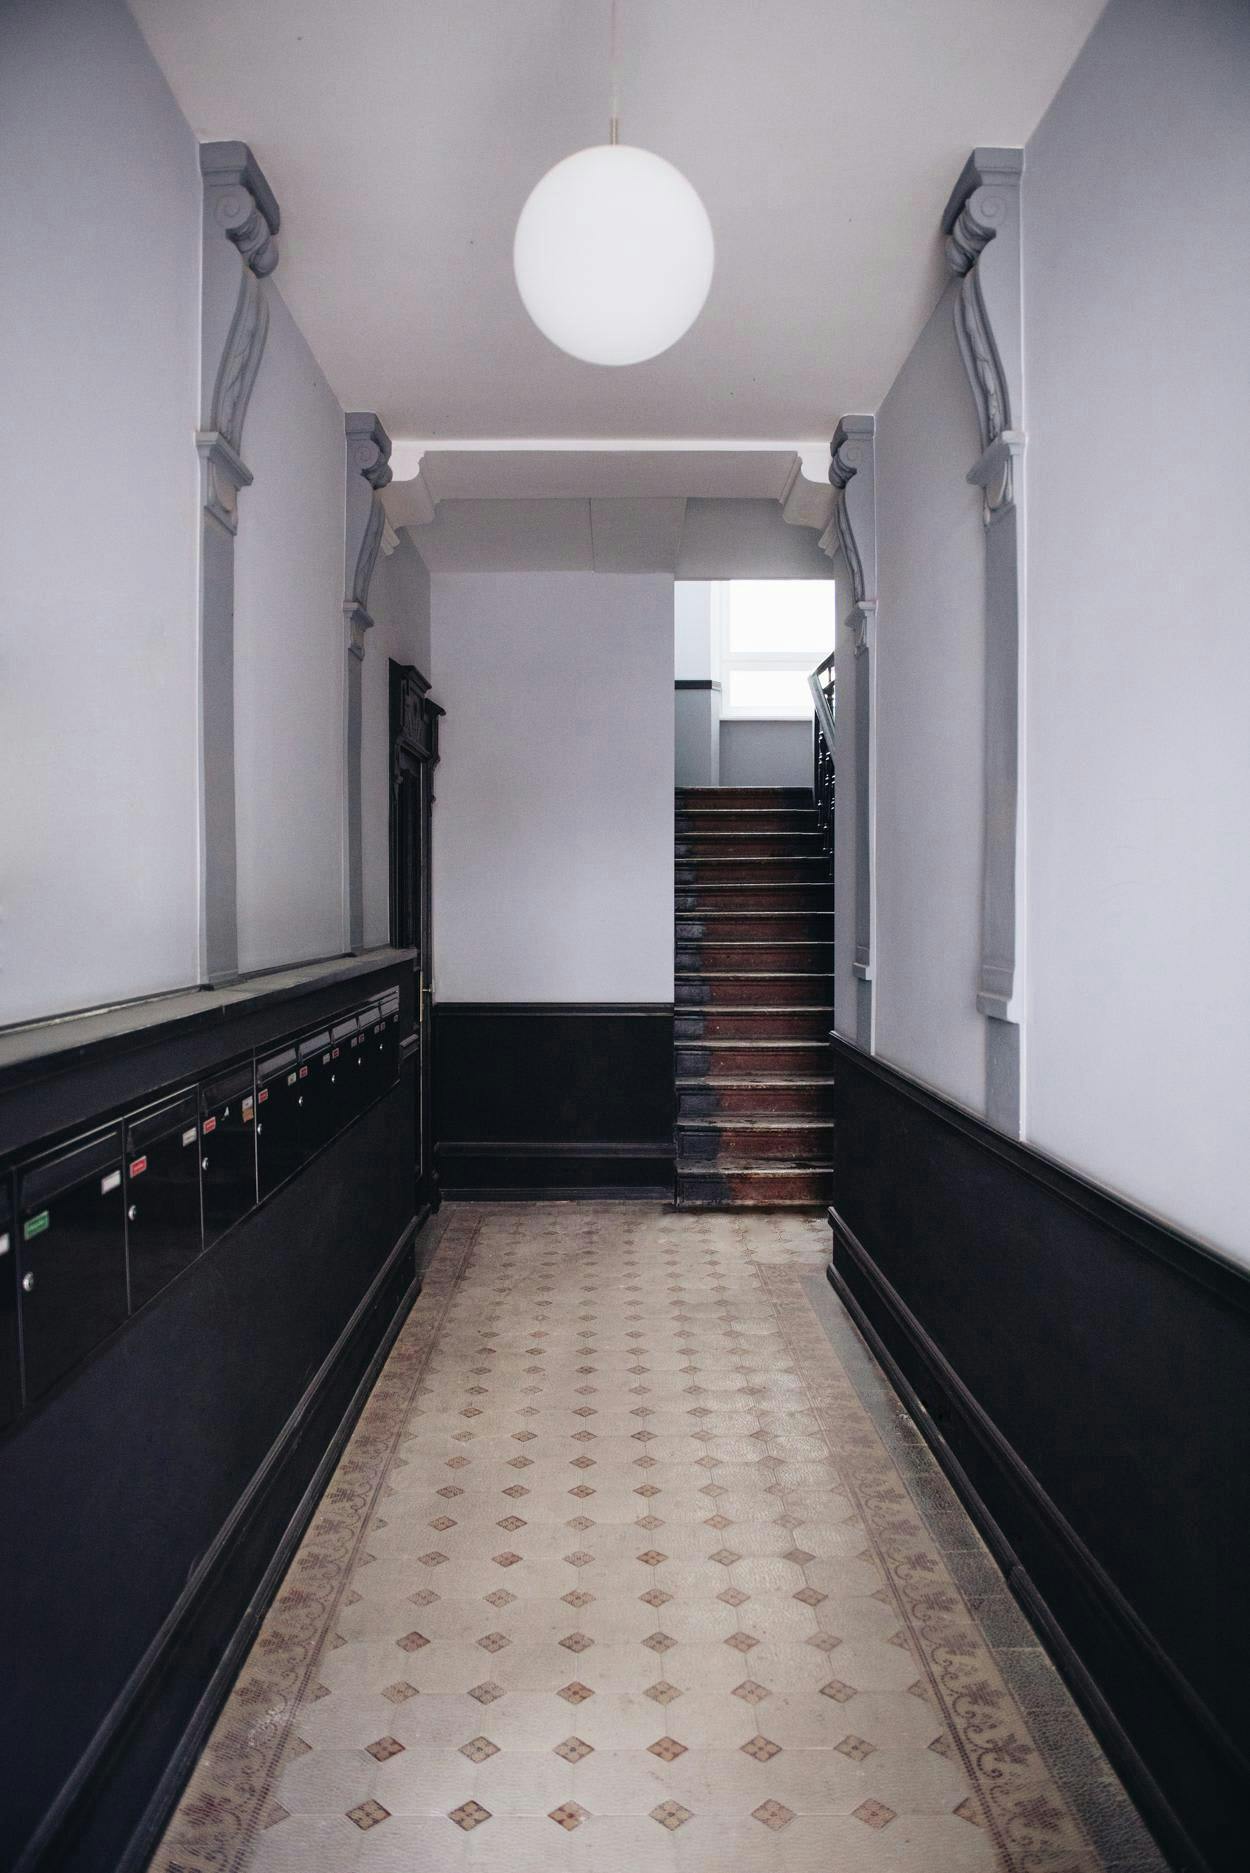 The image shows a long, narrow hallway with a black and white checkered floor. The hallway is empty, with no people or objects visible. The hallway is lit by a large, round, white light fixture, which is situated above the stairs. The light fixture is positioned at the top of the stairs, providing a bright and welcoming atmosphere. The hallway appears to be empty and clean, making it a suitable space for a quiet walk or a peaceful retreat.